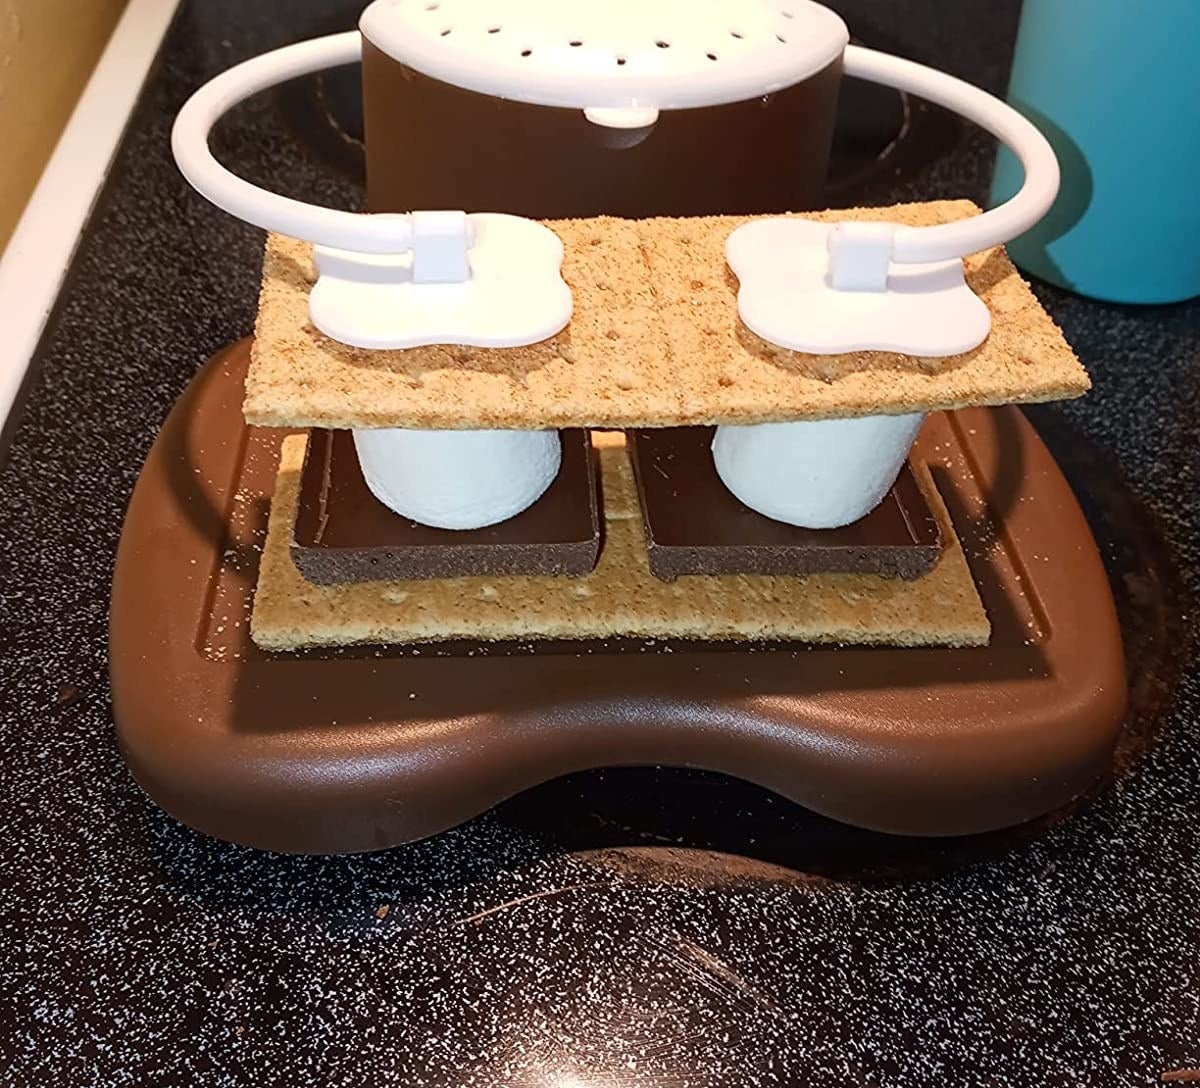 The s&#x27;mores maker holding two s&#x27;mores on stove top